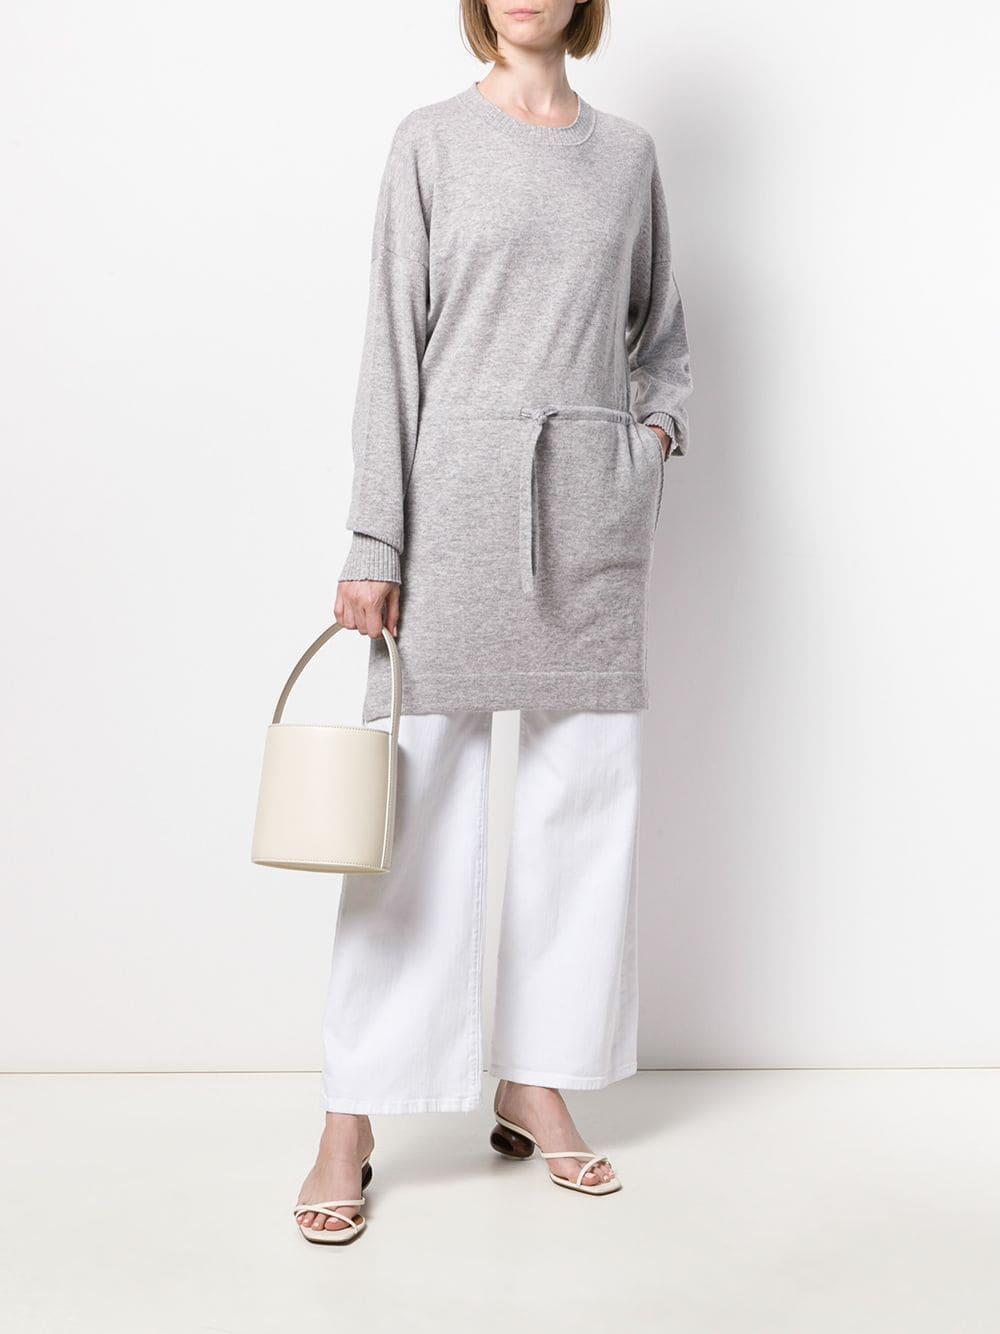 Le Kasha Cashmere Japan Knitted Dress in Grey (Gray) - Lyst